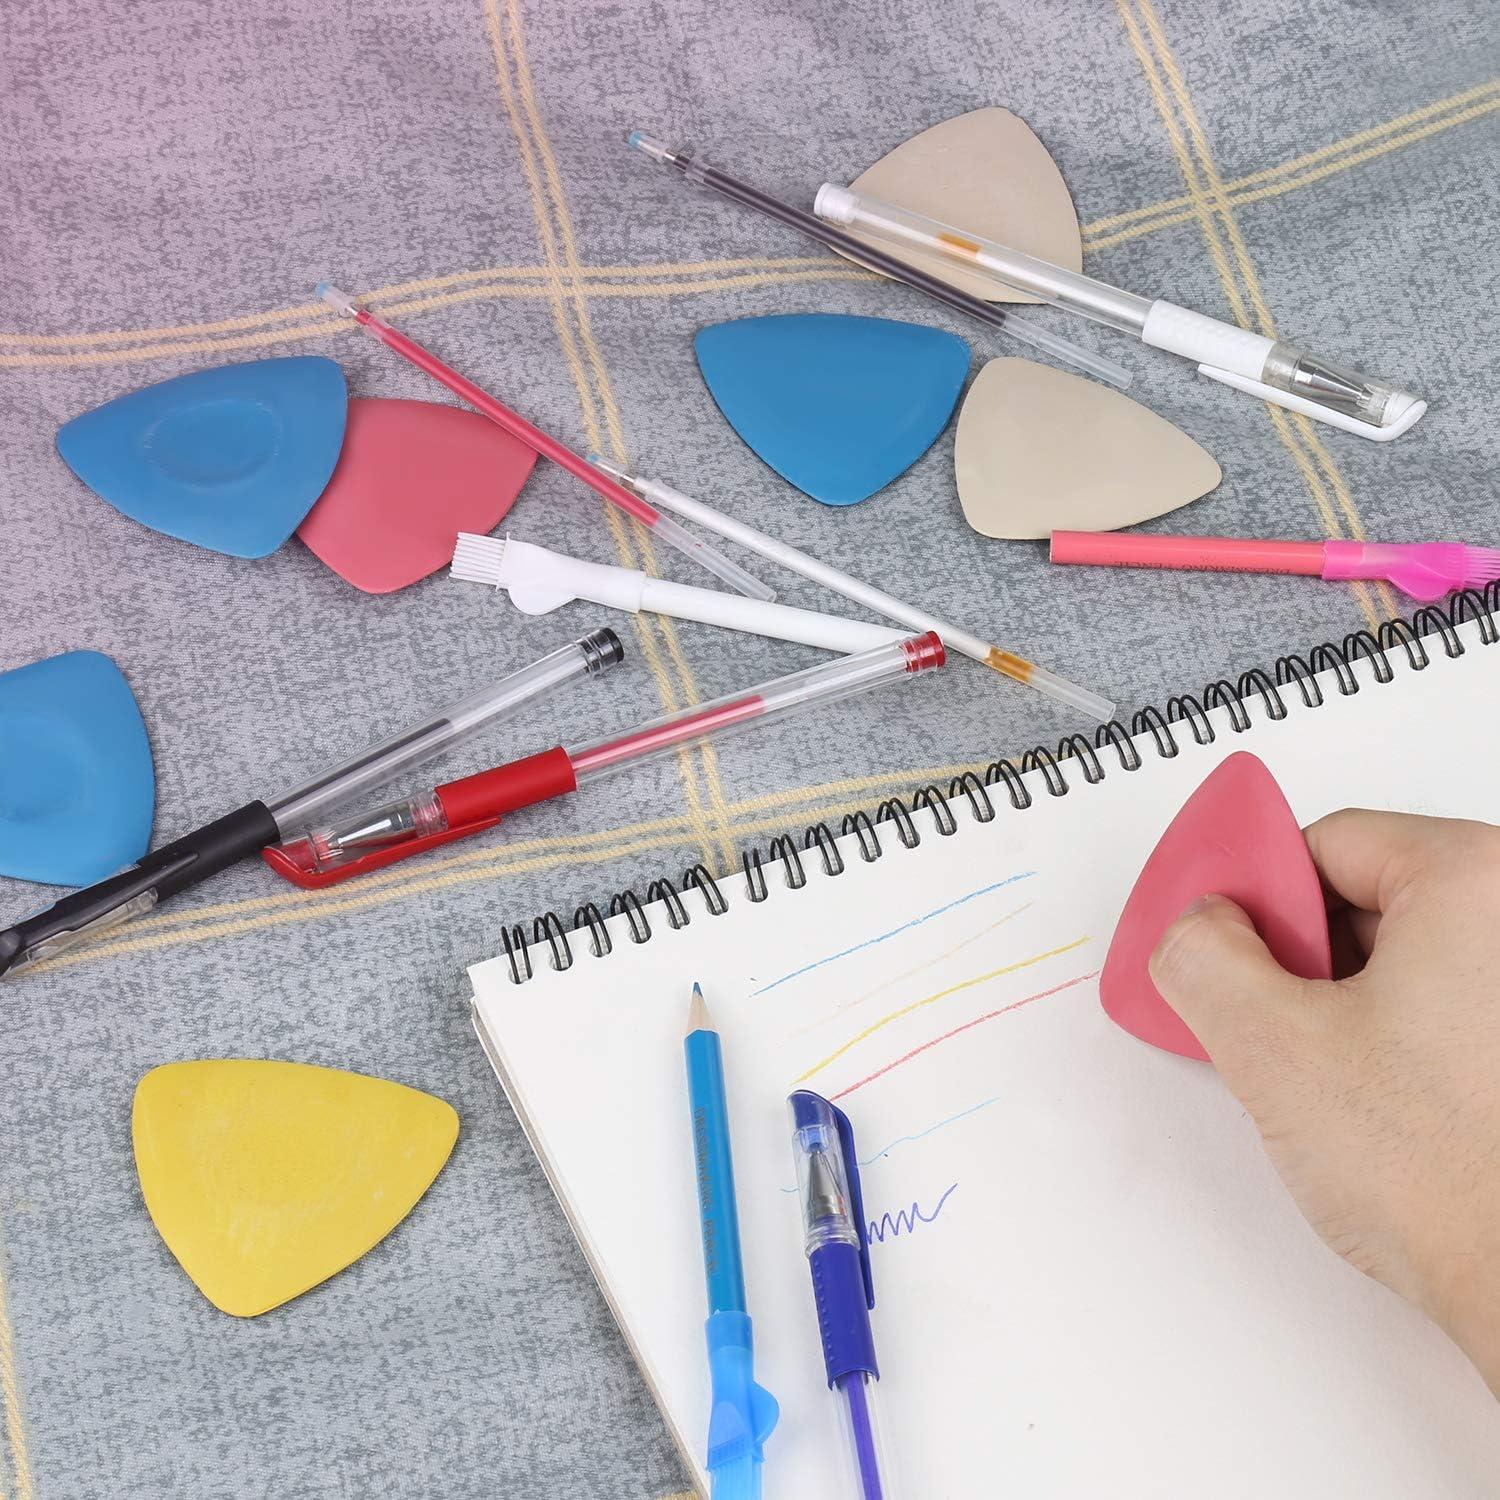 Easy to Erase Fabric Chalk Markers for Sewing and Clothing Design